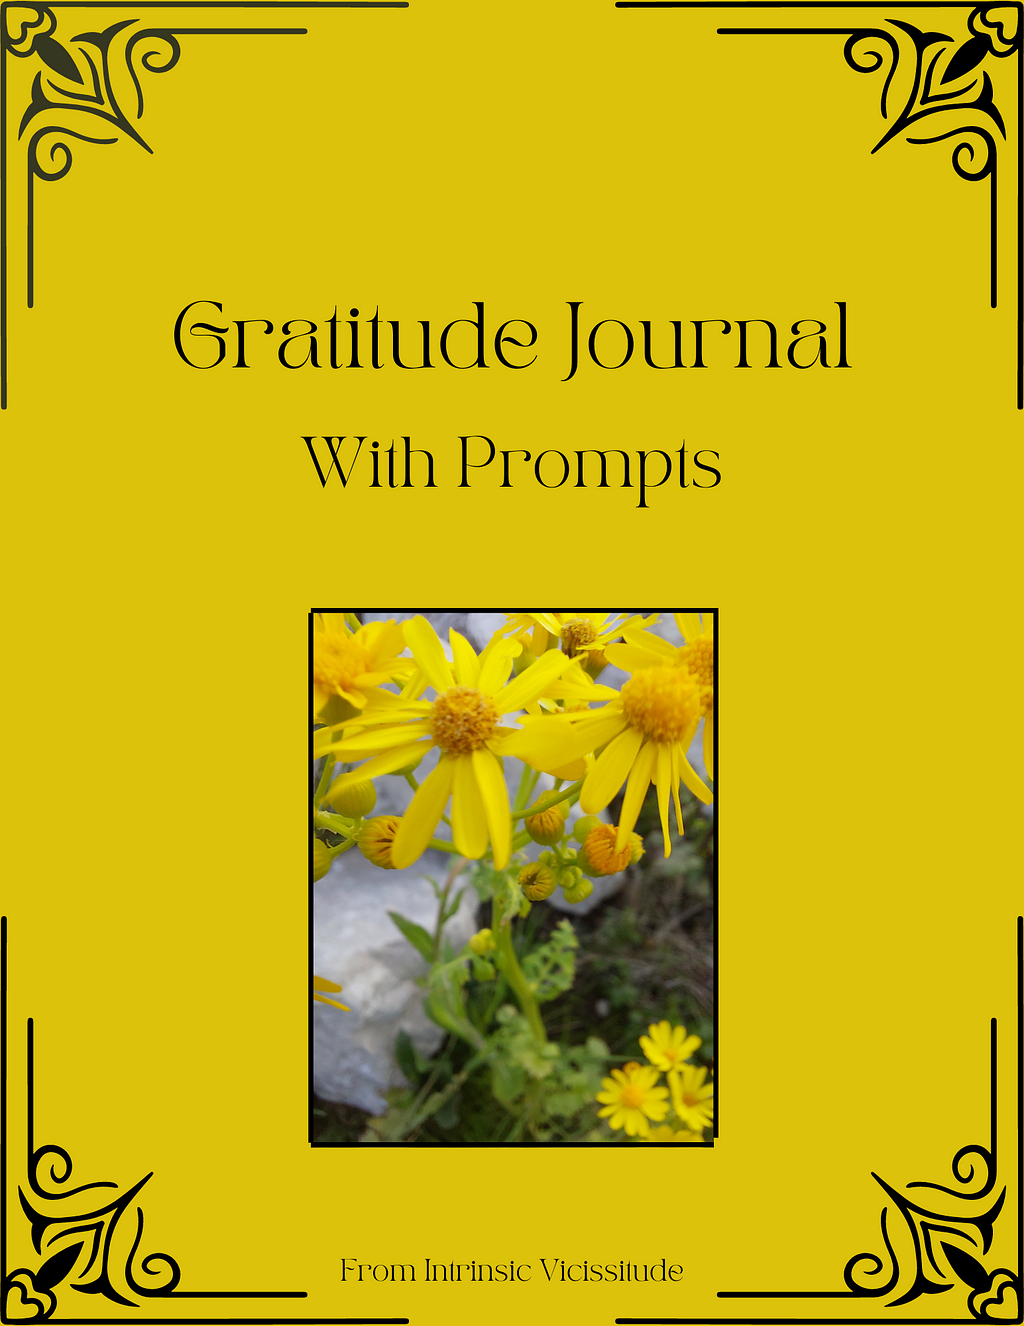 Gold and yellow cover of the Gratitude Journal With Prompts from Intrinsic Vicissitude.